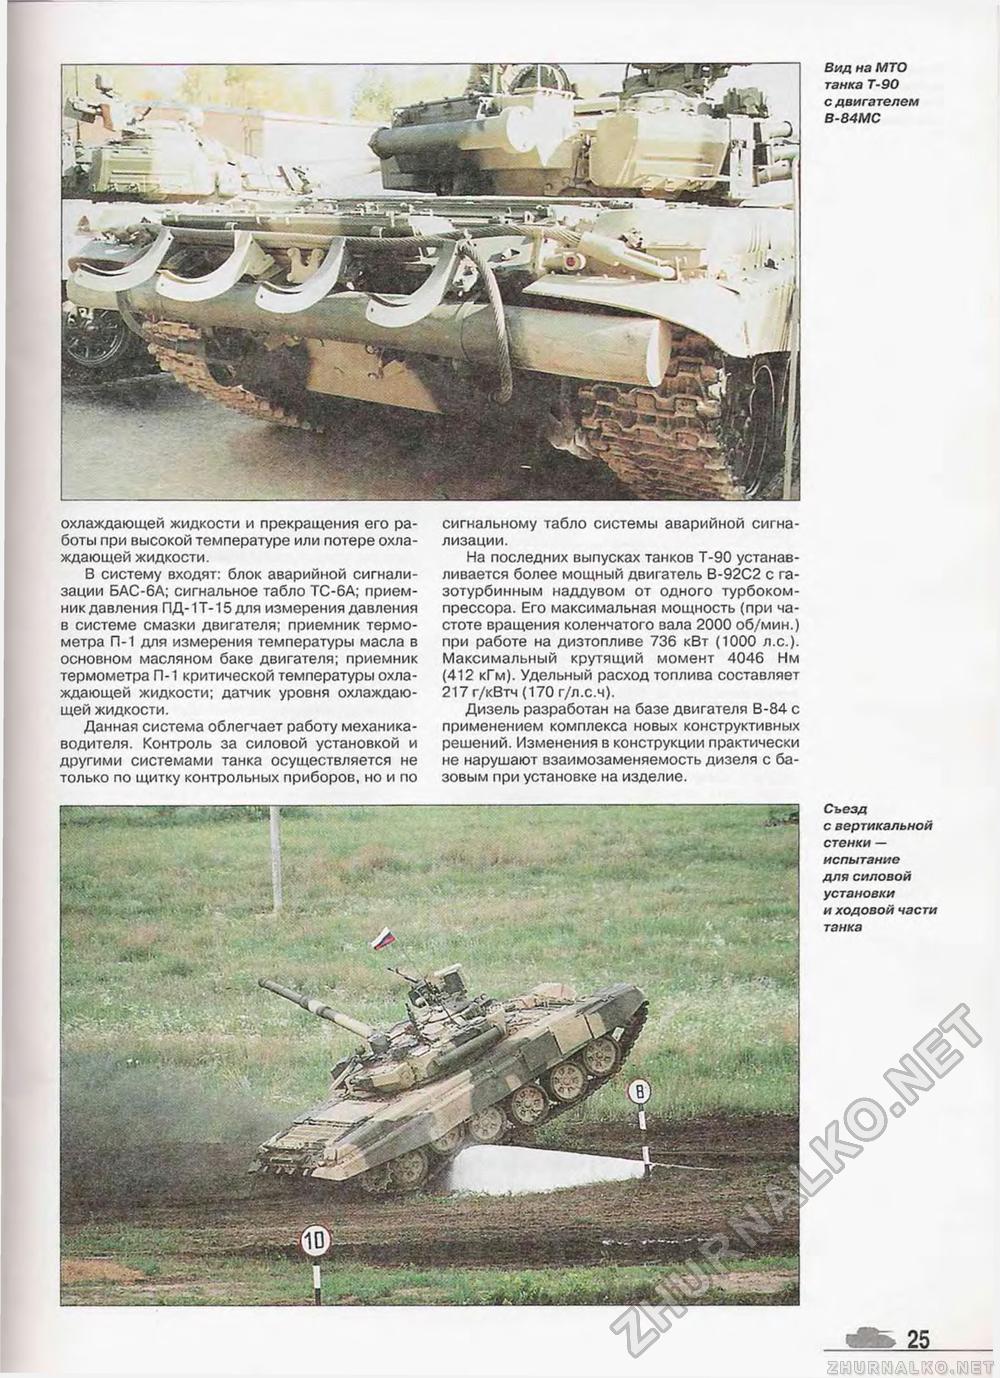  Special - T-90,  27